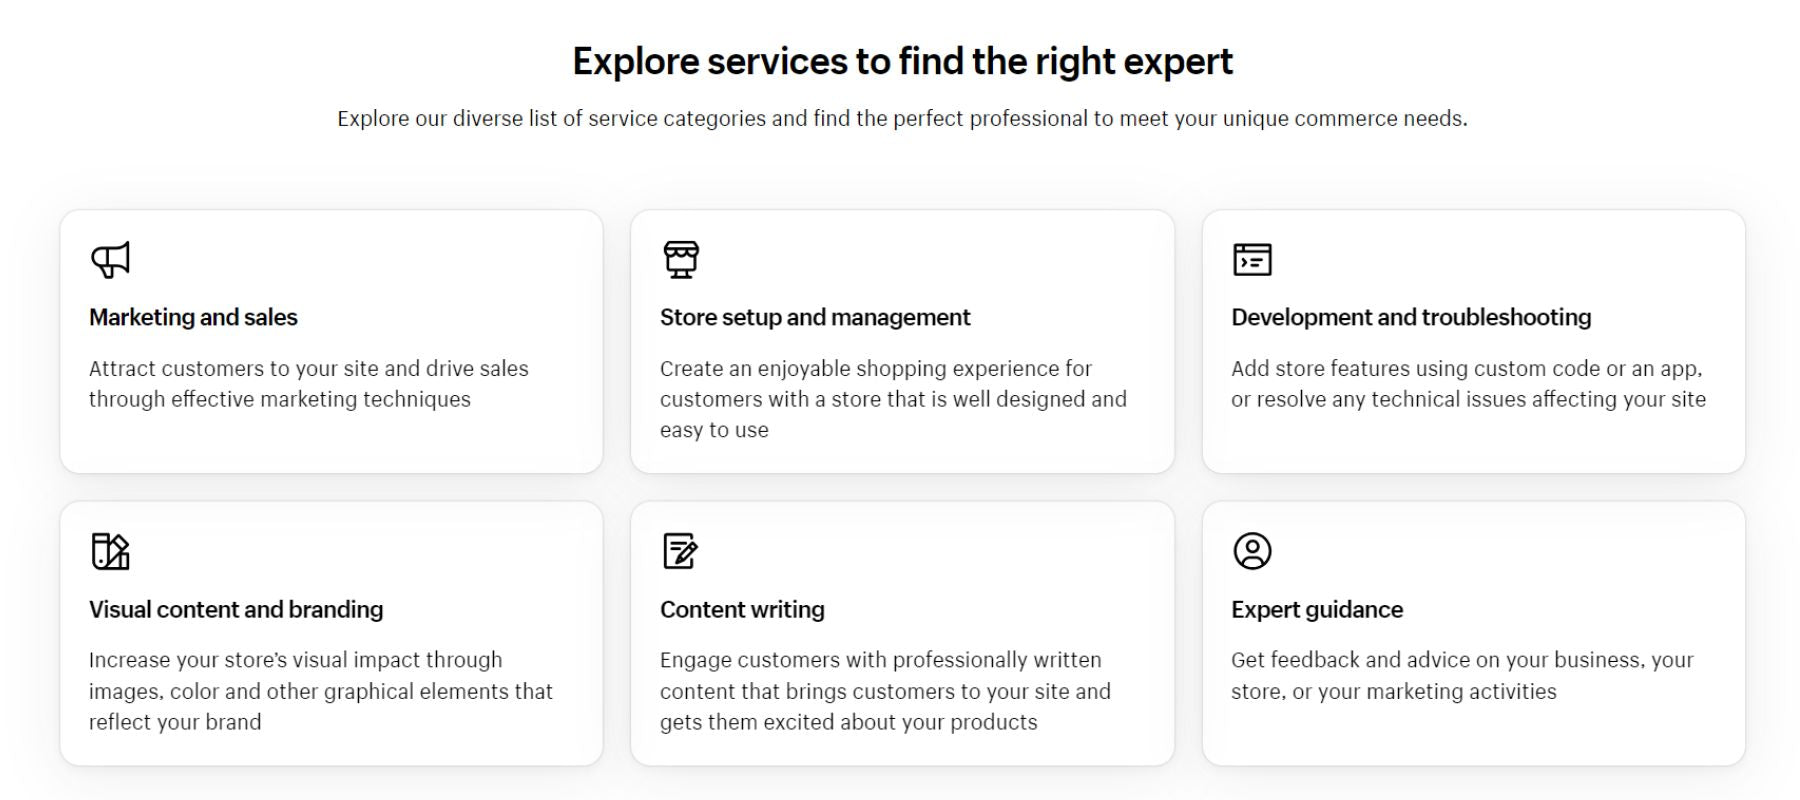 Shopify Experts’s services